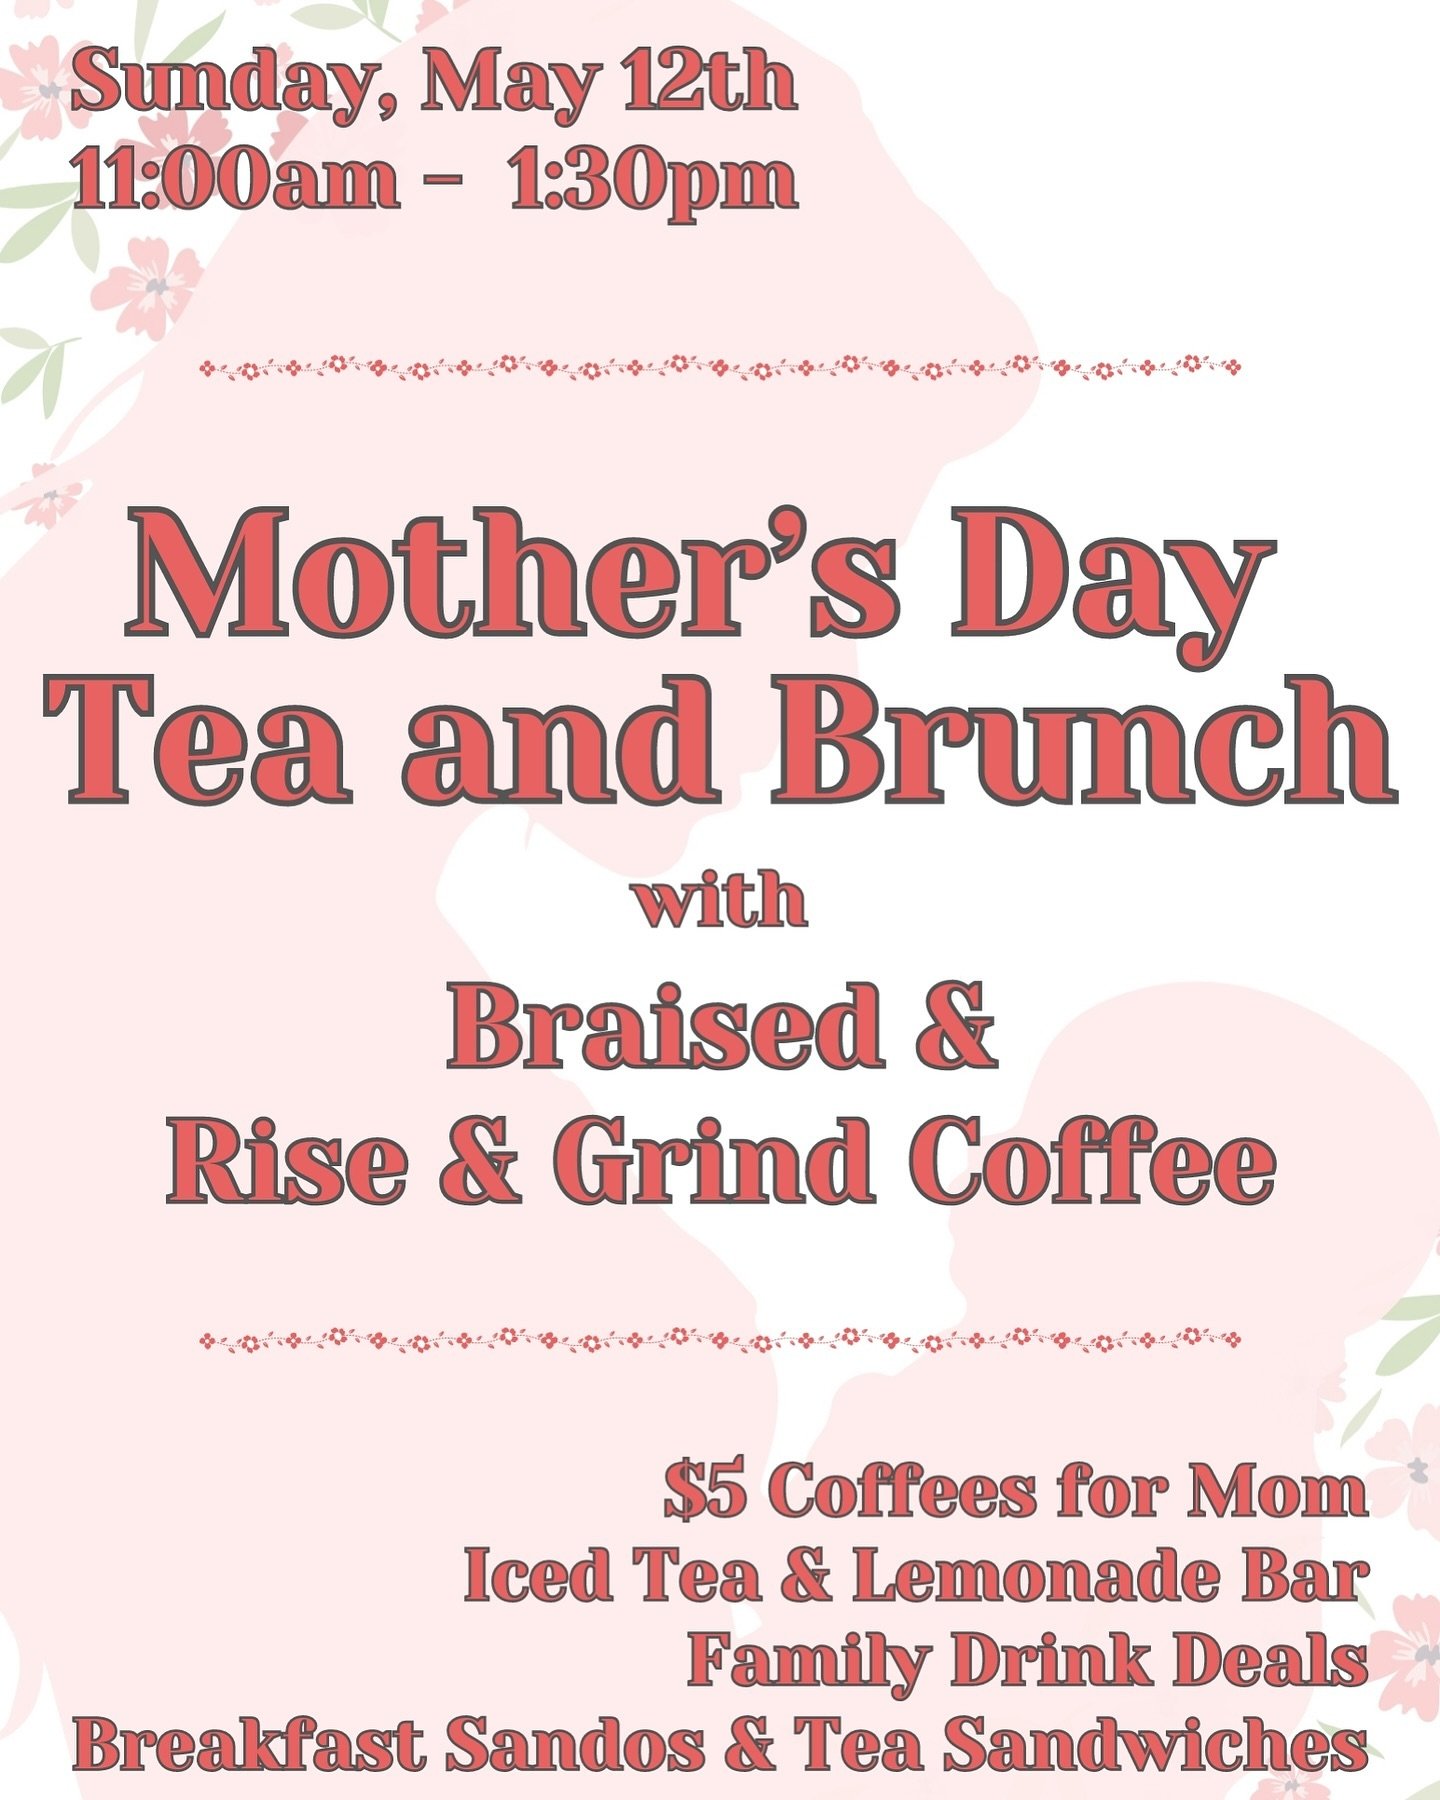 Treat your the moms in your life to an easy Sunday morning brunch while letting Braised and @riseandgrindcoffee541 do the work for you!

We will be opening up at 11AM with coffee &amp; tea specials, as well as gluten free breakfast sandos and tea san